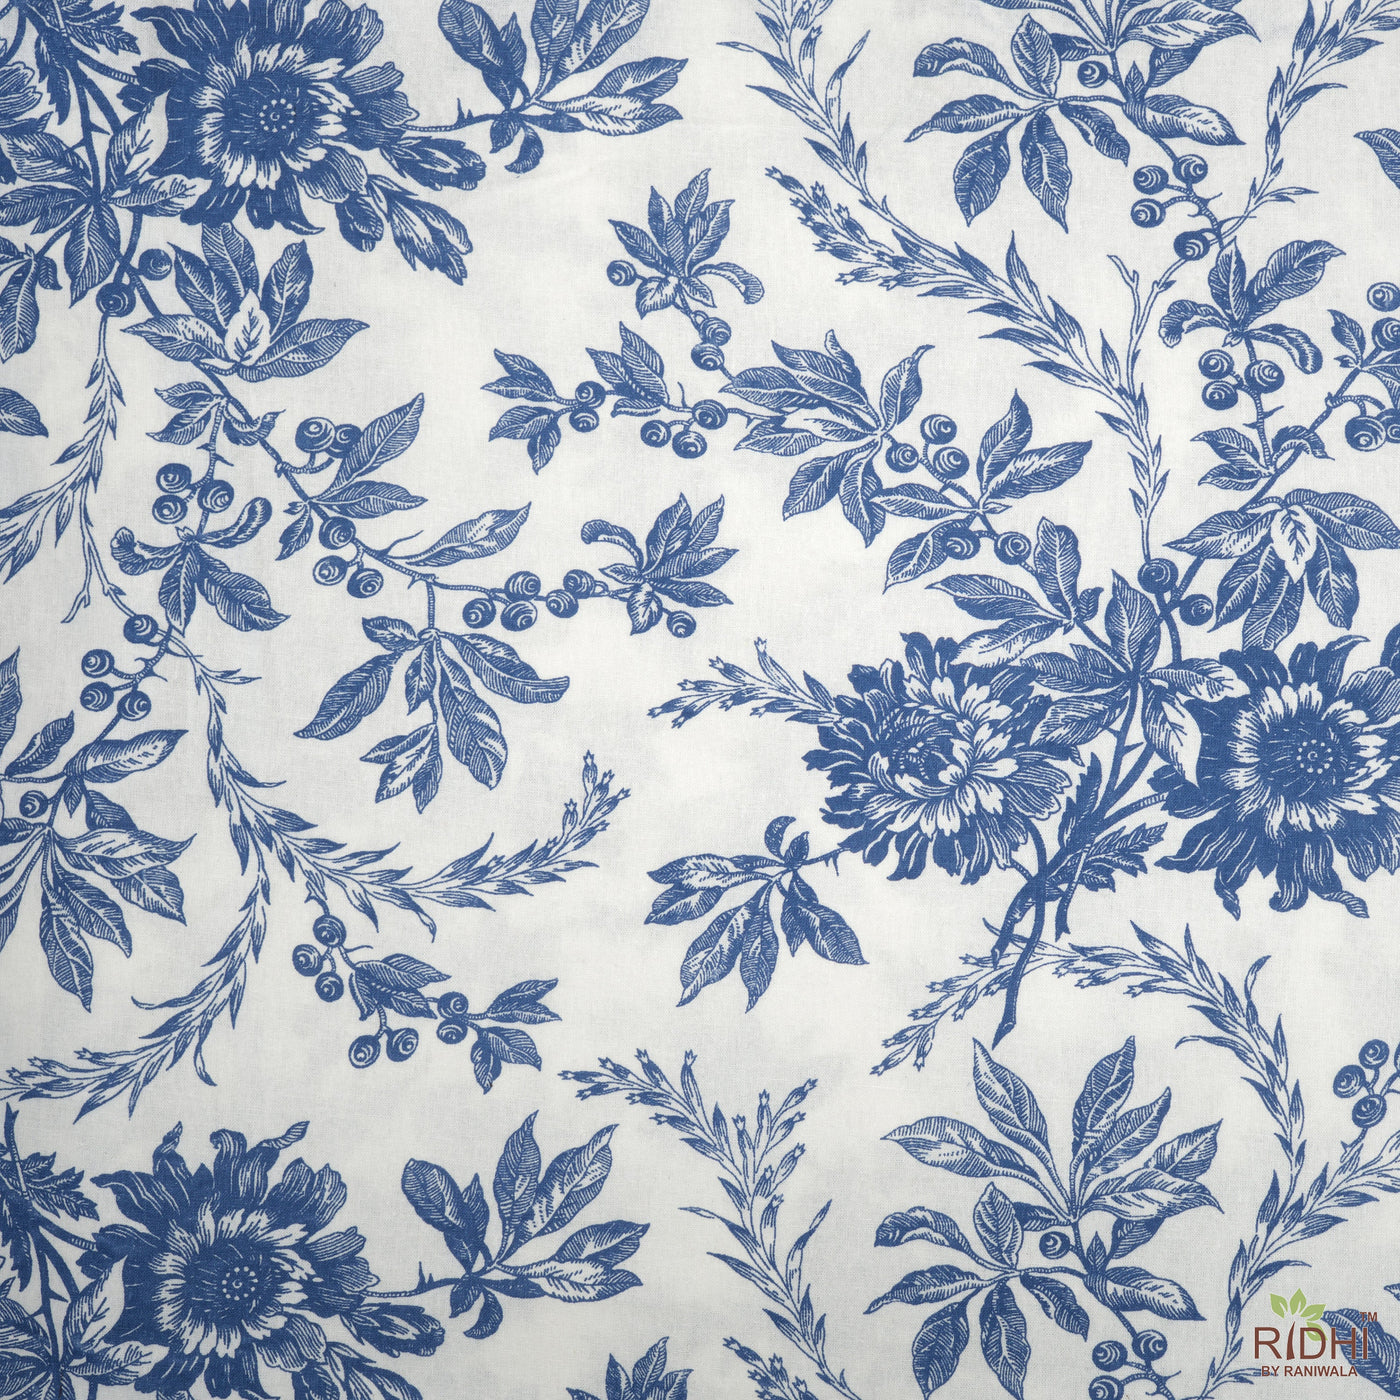 Incremental Blue and White Indian Floral Printed 100% Pure Cotton Cloth, Fabric for Curtains, Upholstery Fabric, Fabric by the Yard, Curtain